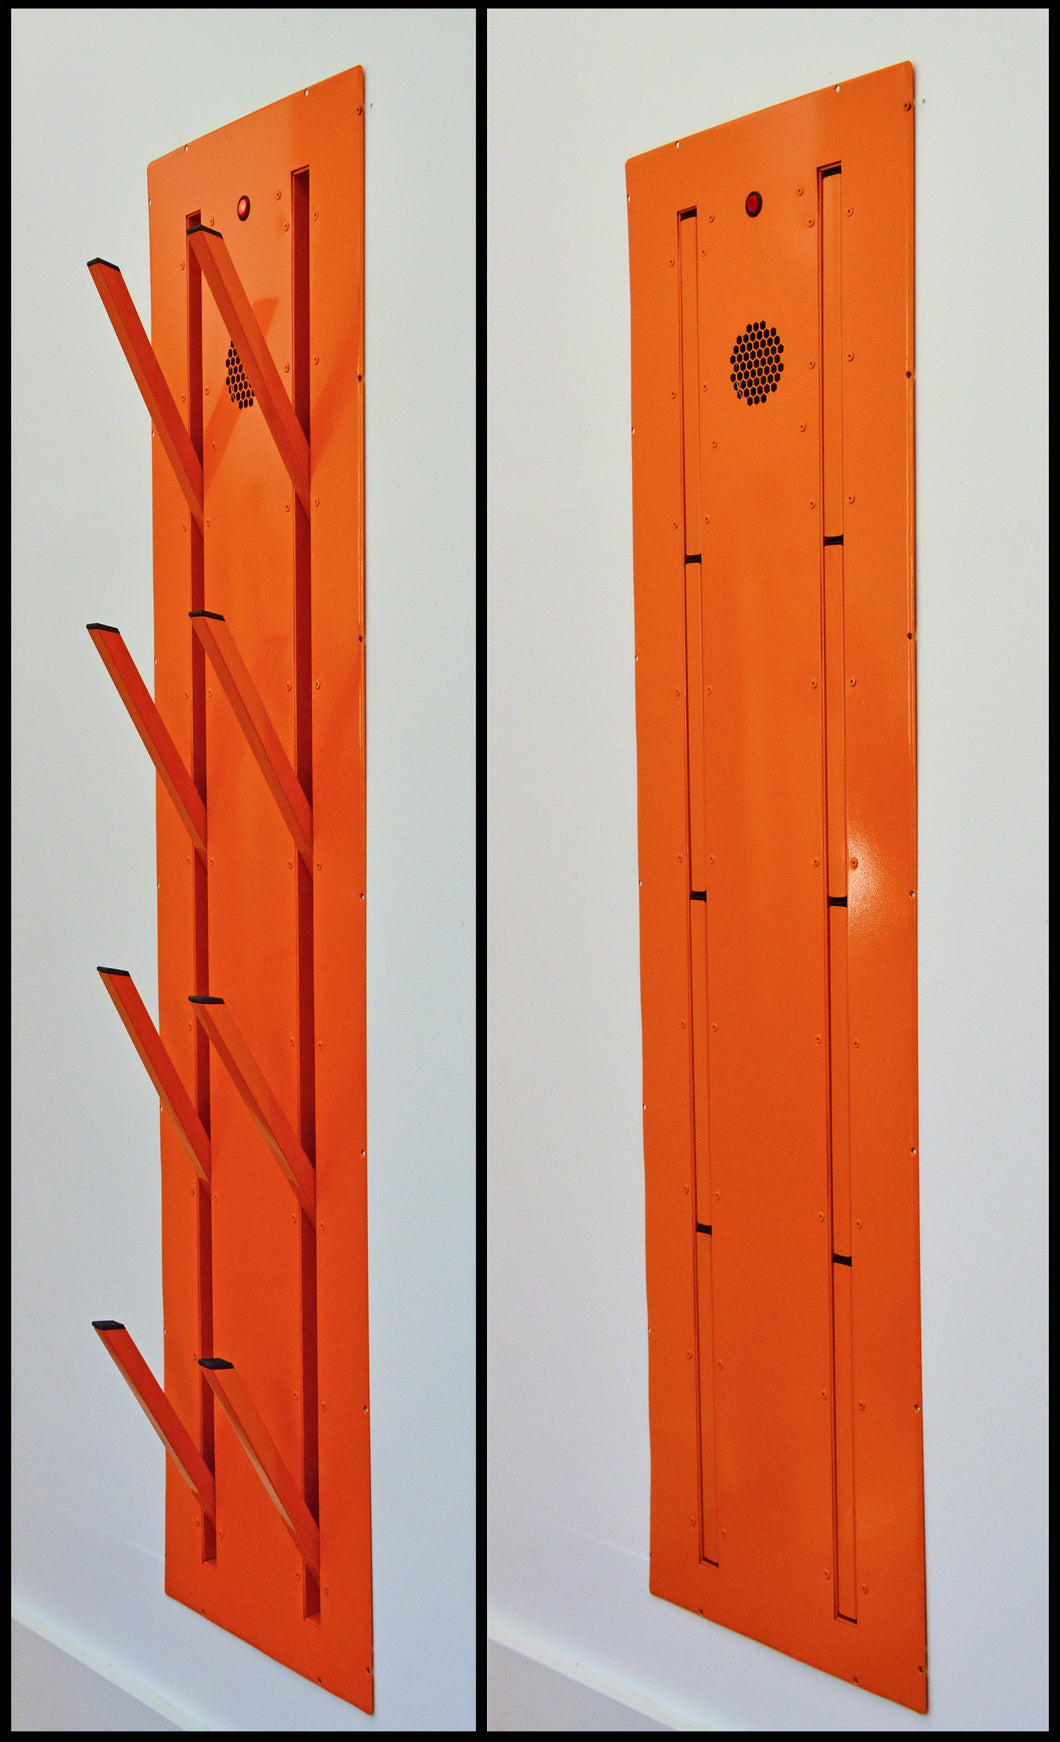 Wall mounted ski Boot Dryer for flush mount inside a wall. Four pair stainless steel Warm or ambient air. Attractive space saving design best for ski homes , condos and any mudroom. Timer controlled dryer for ski boots, skates, gloves. Shown custom painted orange.